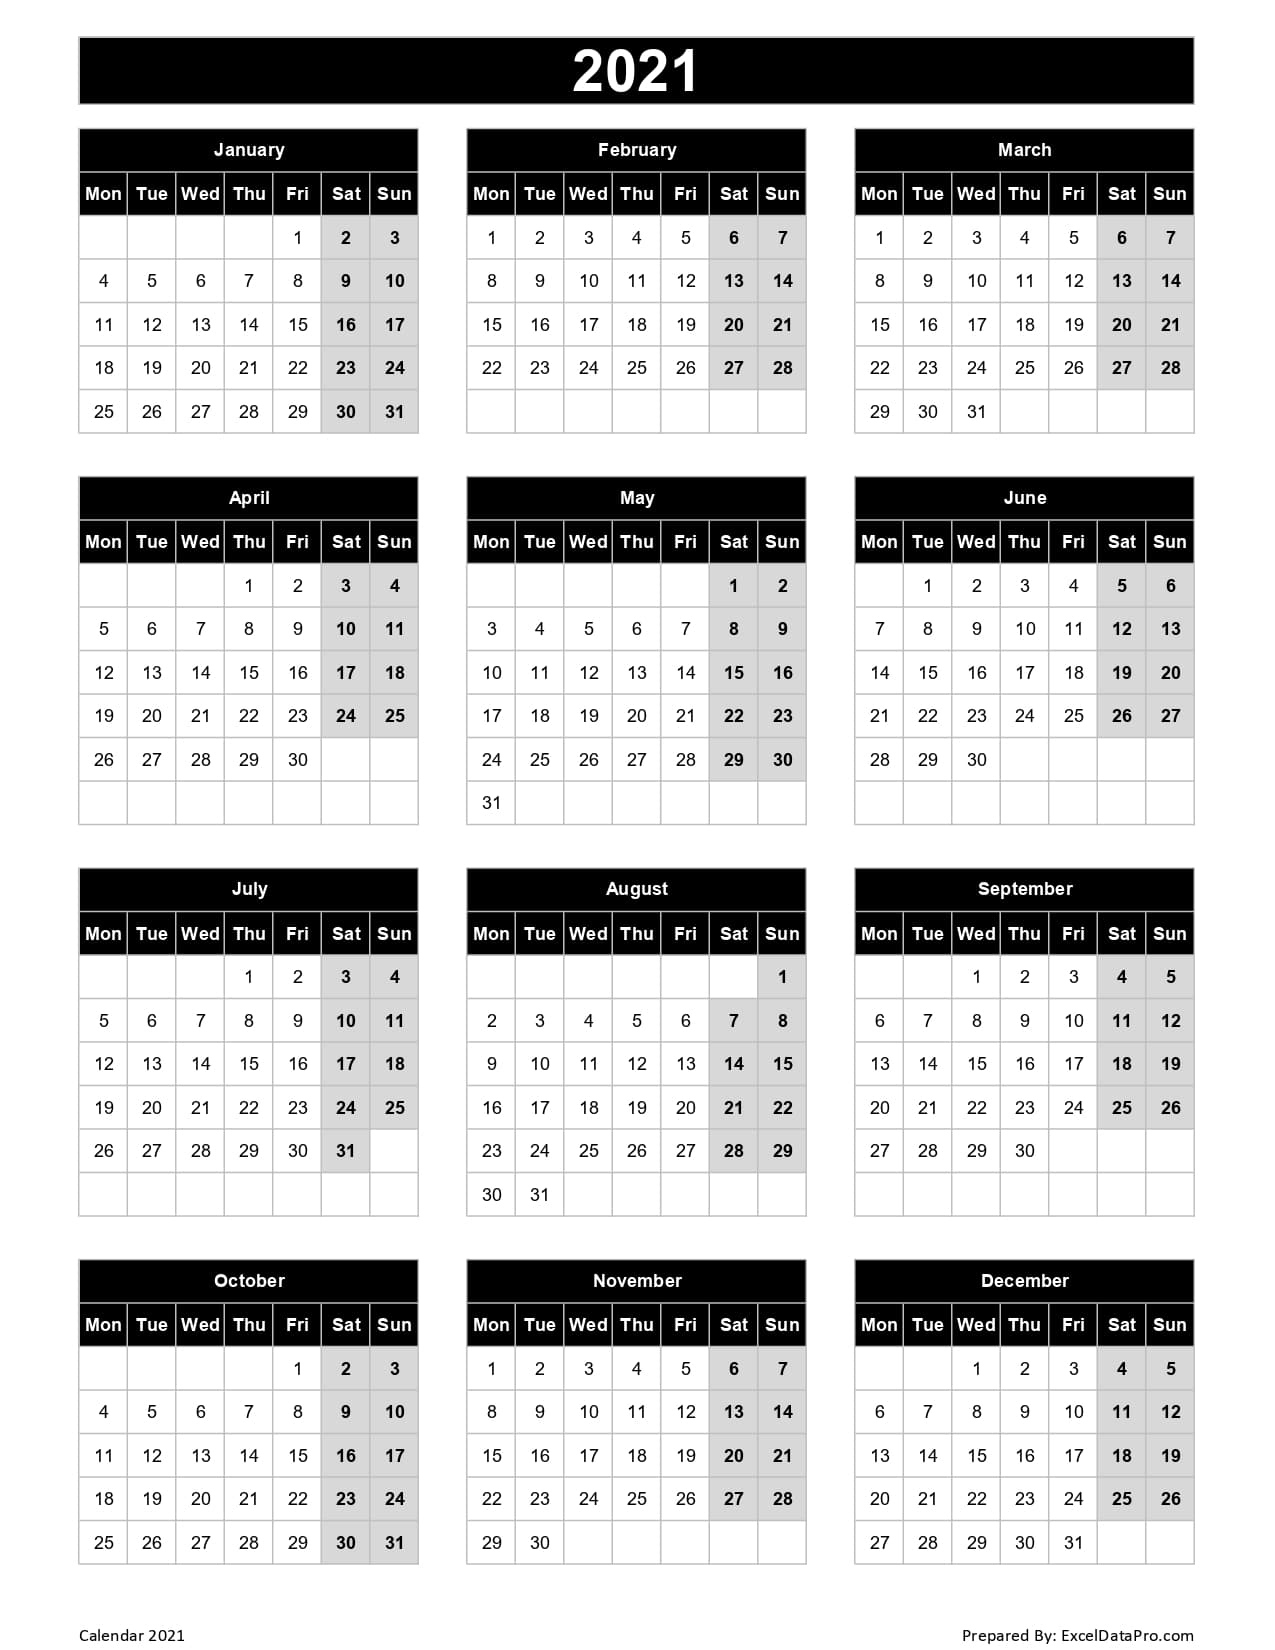 Download 2021 Yearly Calendar (Mon Start) Excel Template - Exceldatapro View Calendar Of December 2021